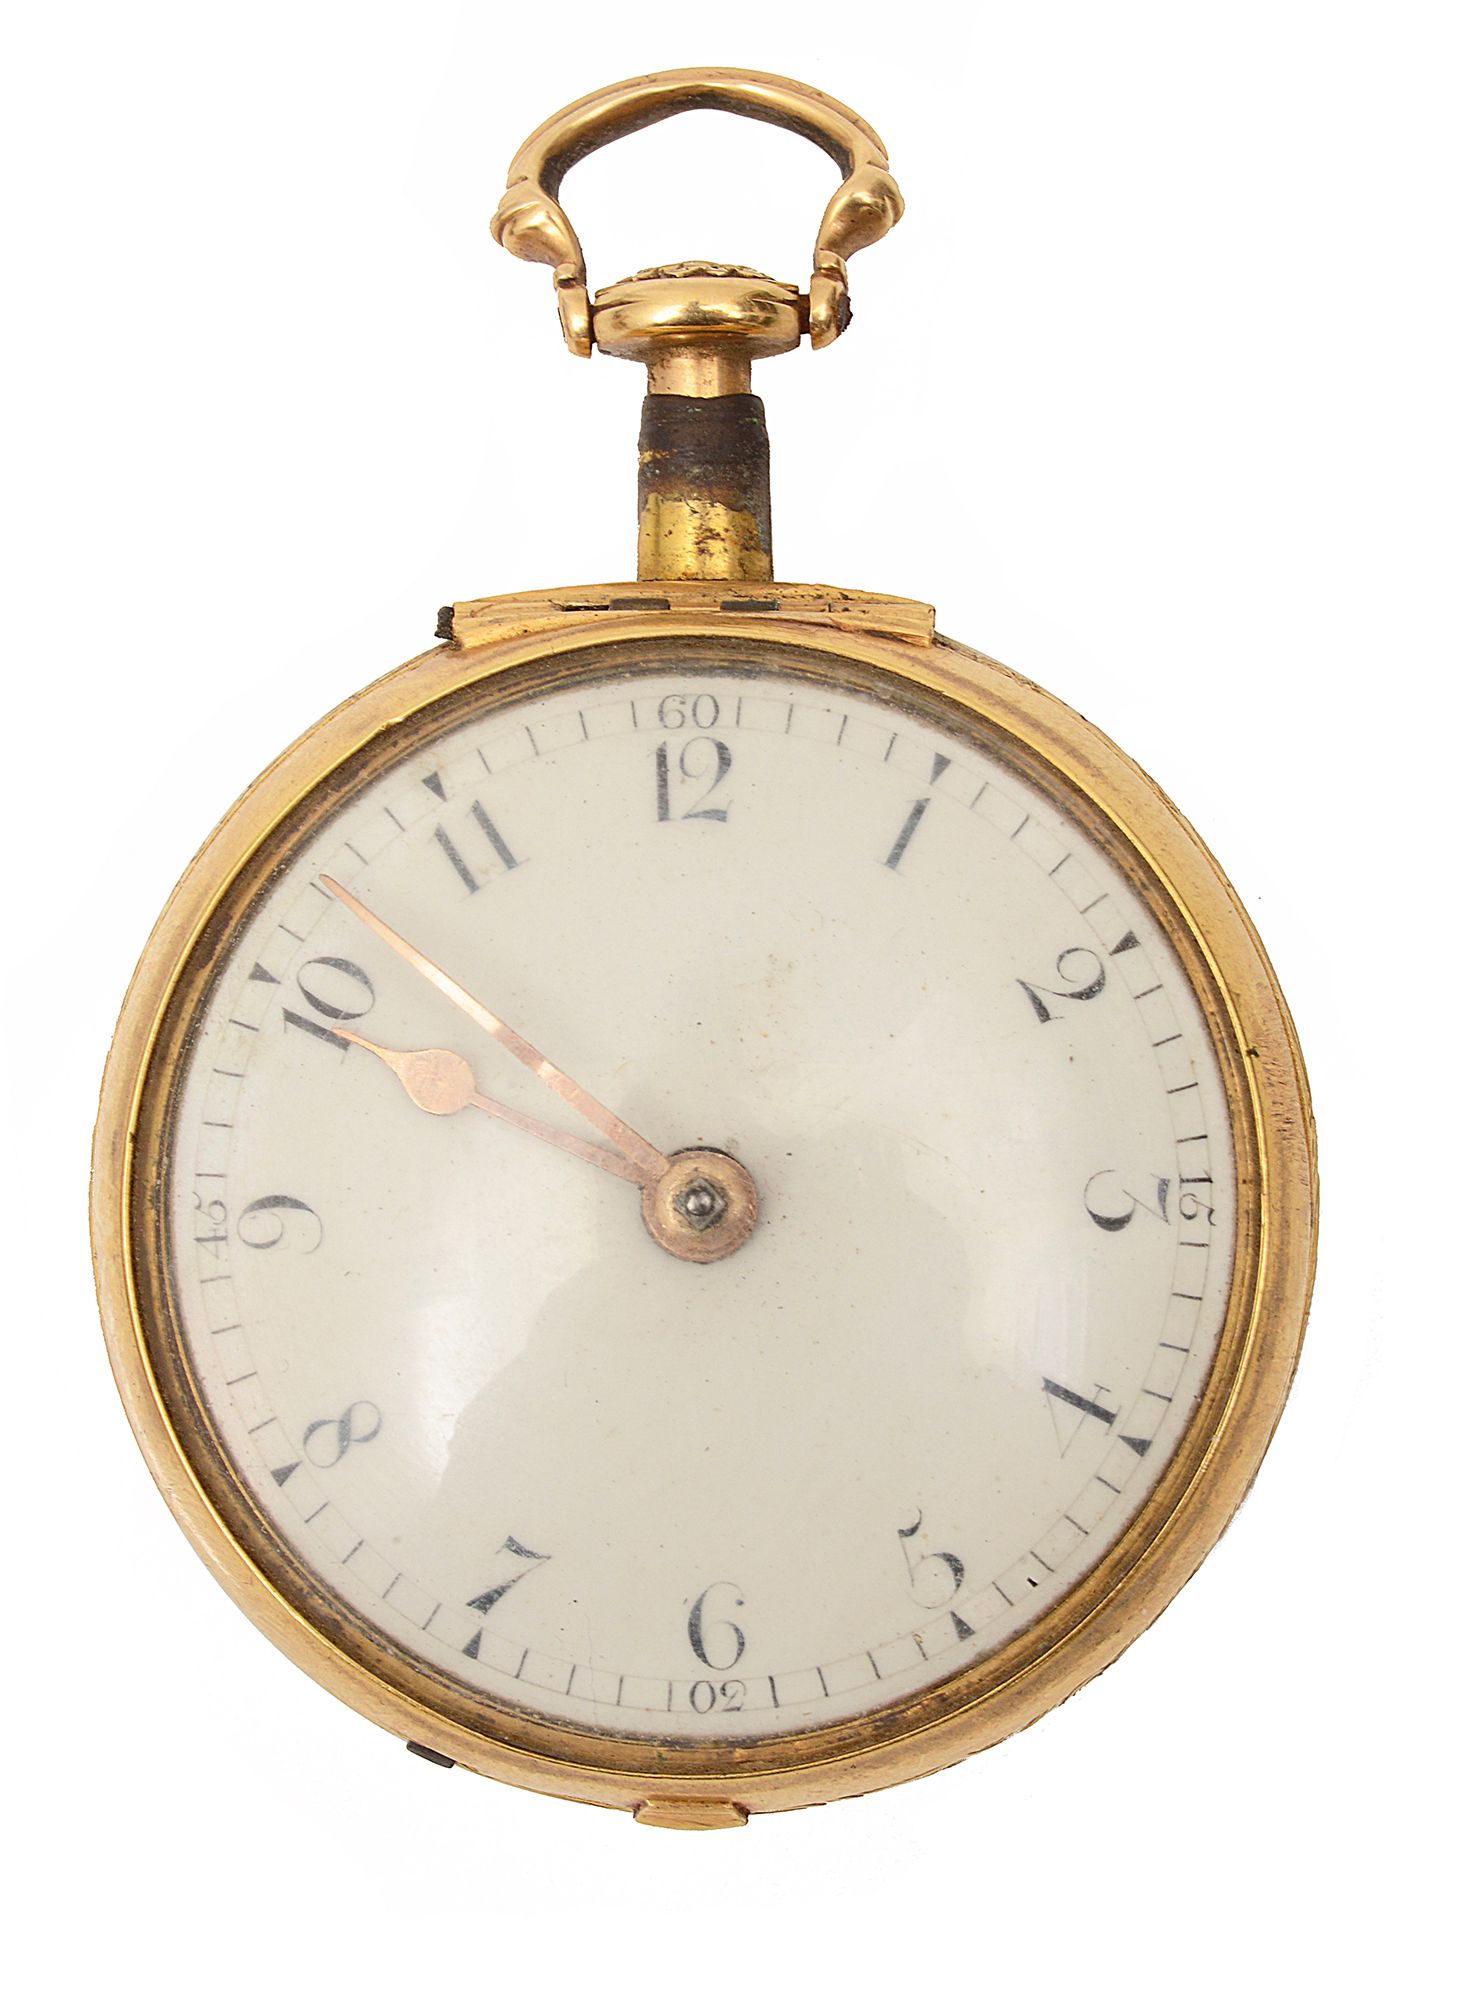 A mid 18th century gold pair case quarter repeating verge fusee pocket watch by William Burton - Image 3 of 7